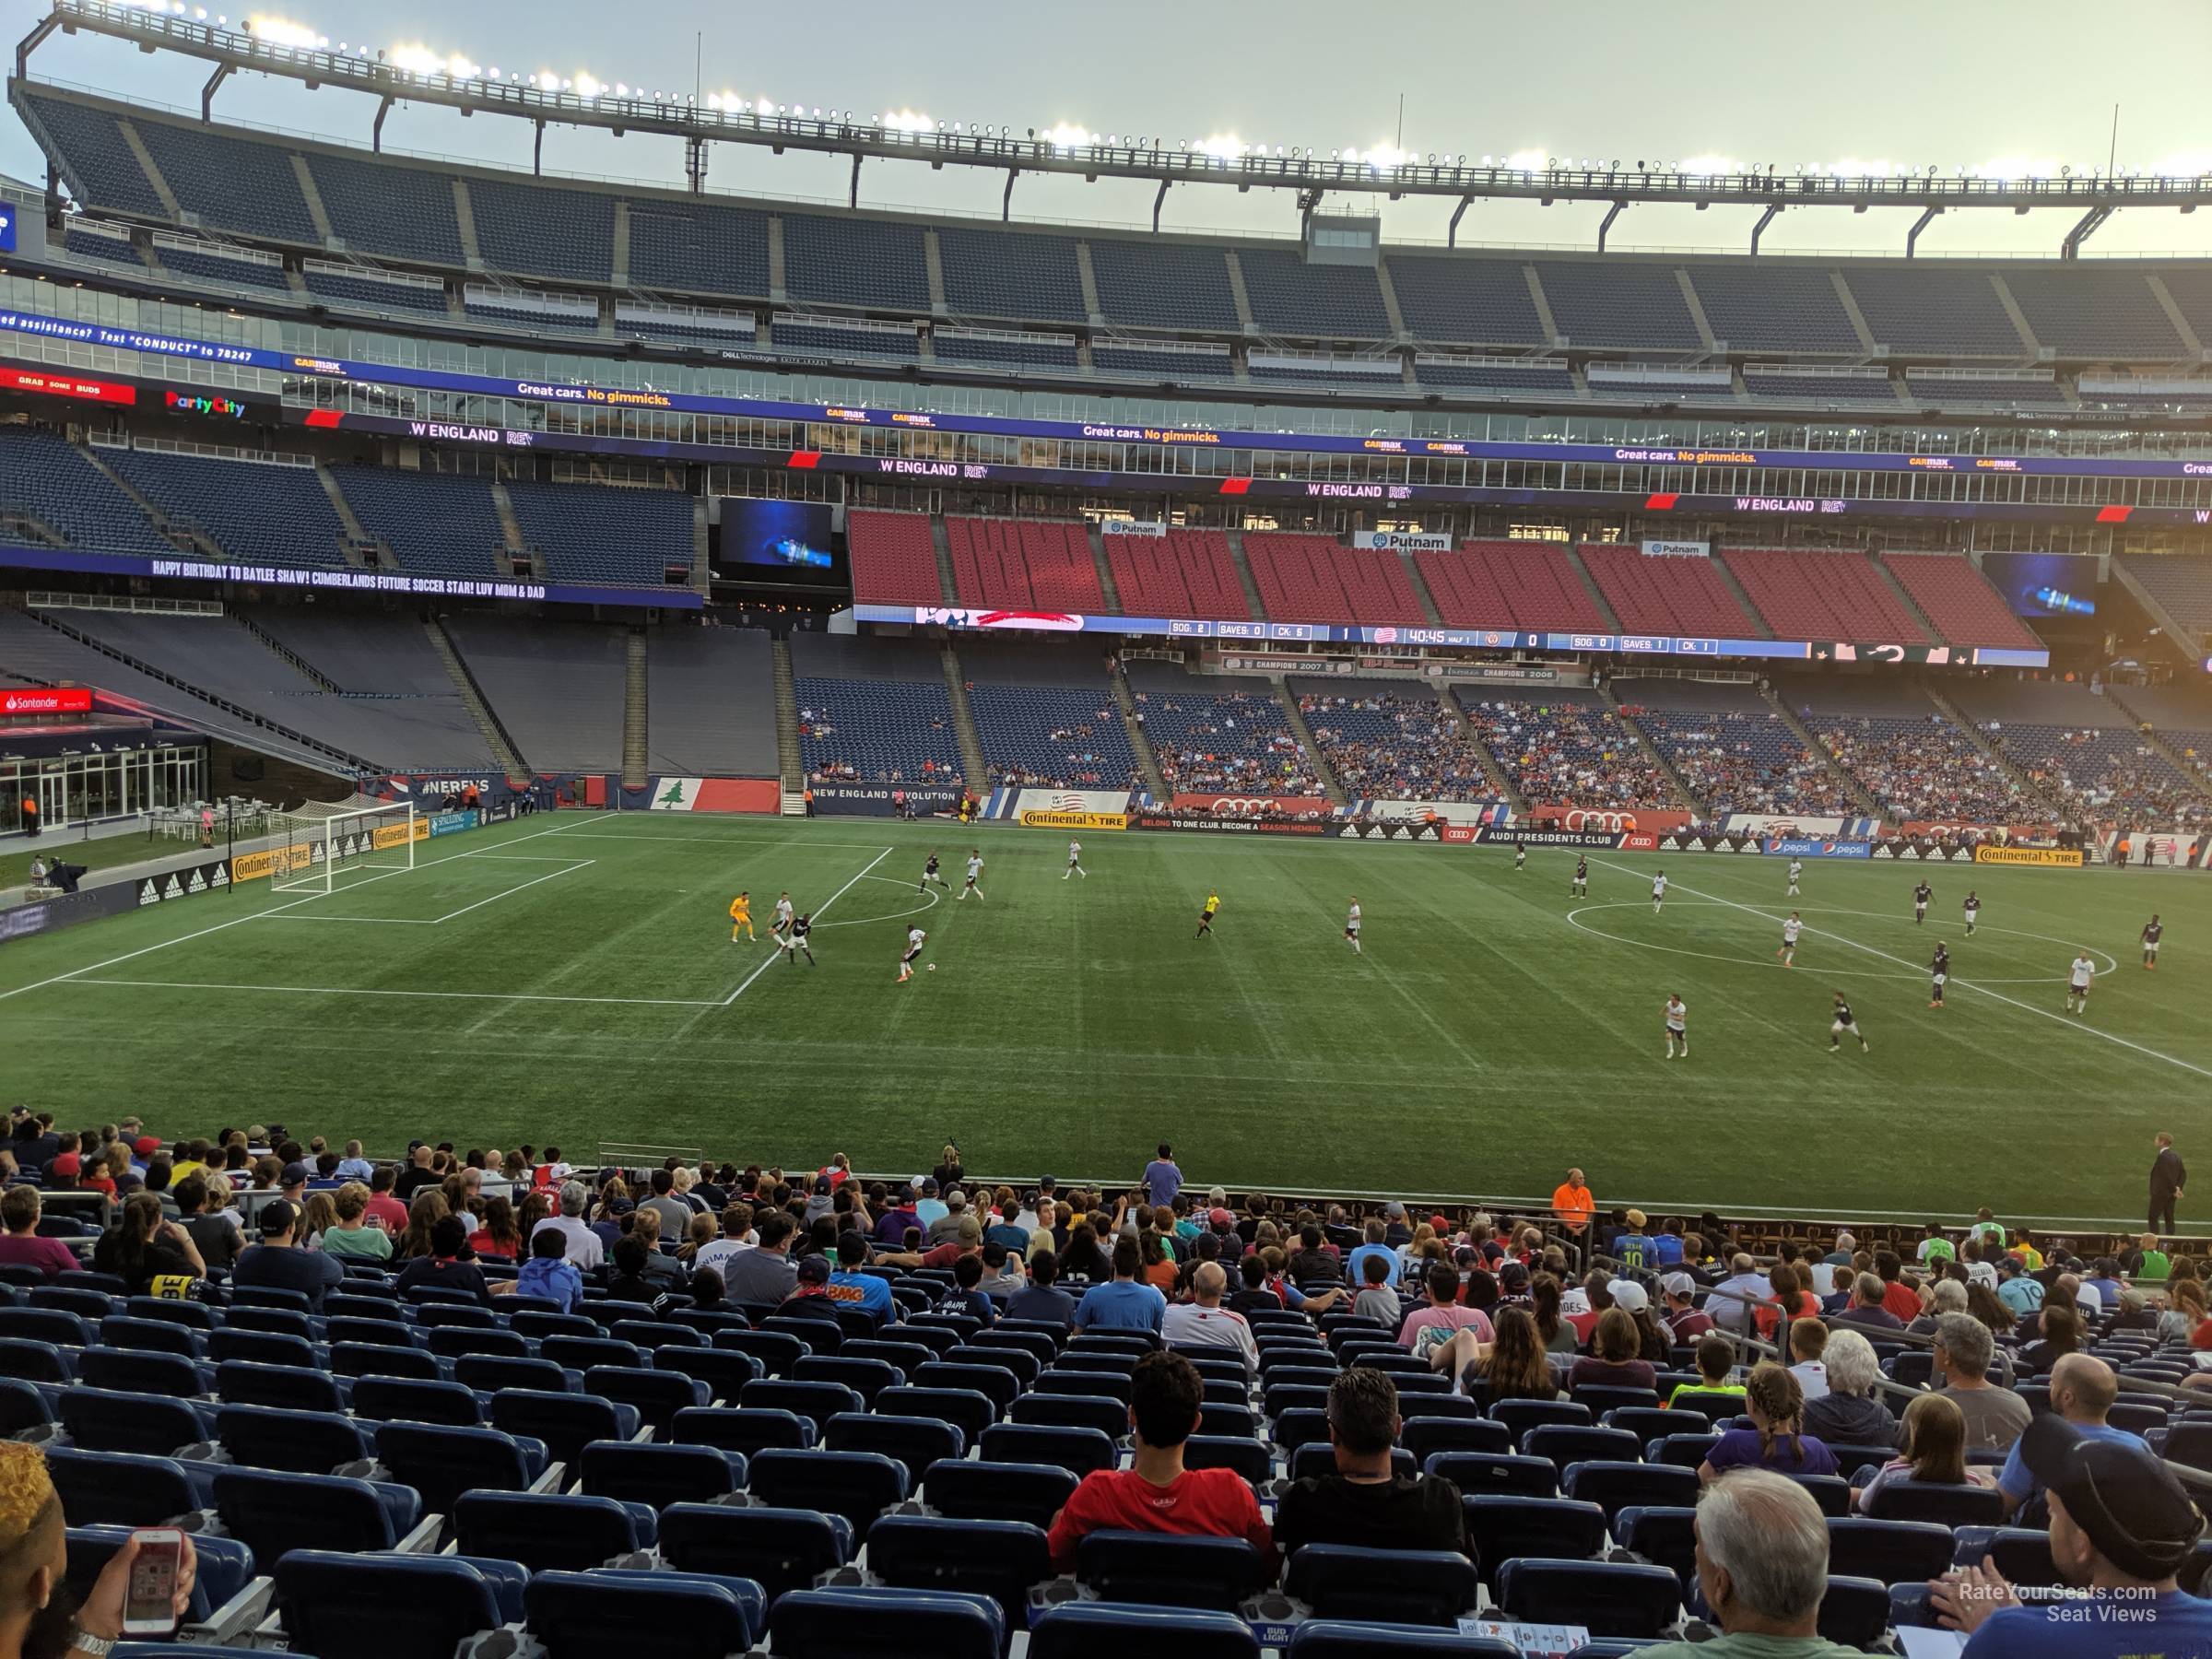 section 112, row 25 seat view  for soccer - gillette stadium